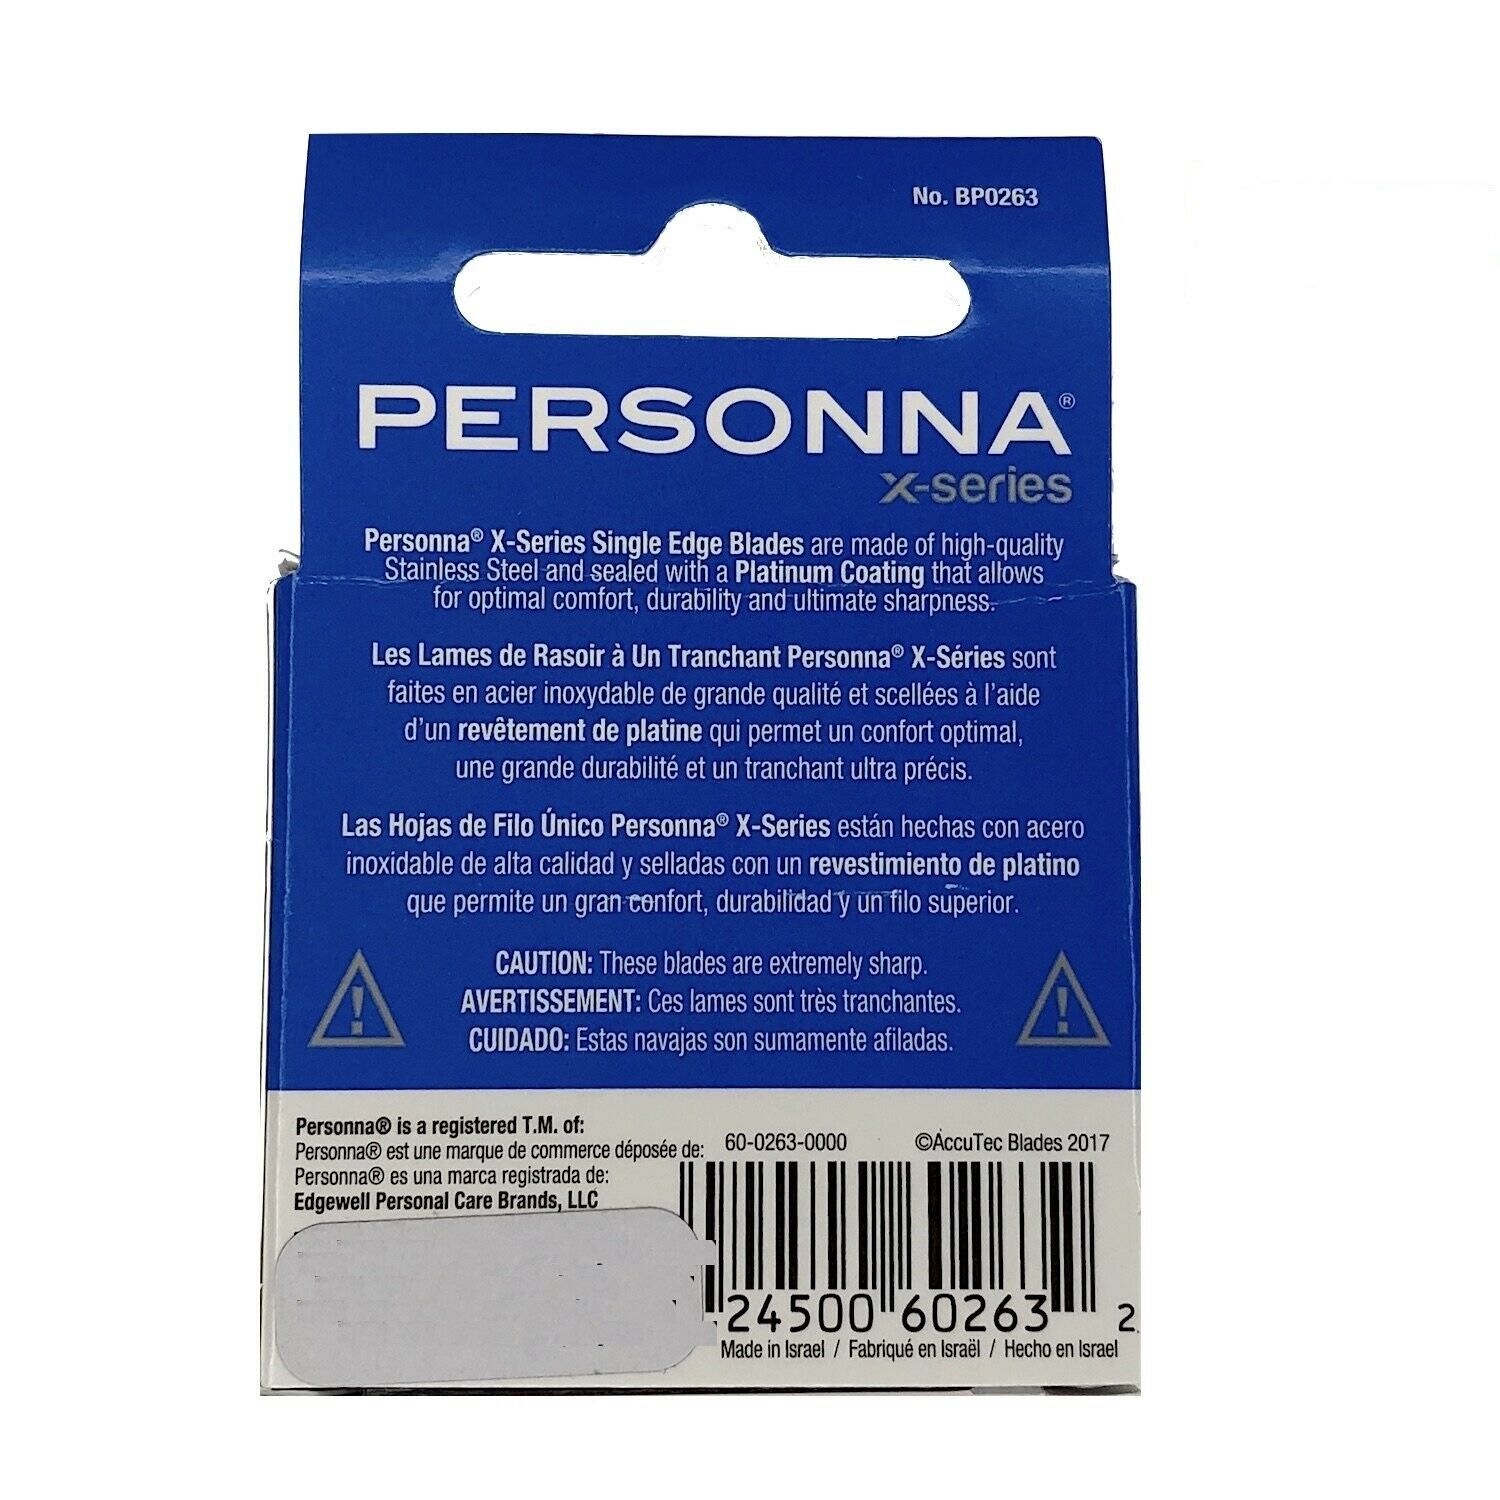 Personna 3-Notch Blue Utility Blades - 100-Pack - 0.025 inch Heavy Duty High Carbon Steel for Extra Durability and Long Life - 61-0849, Other